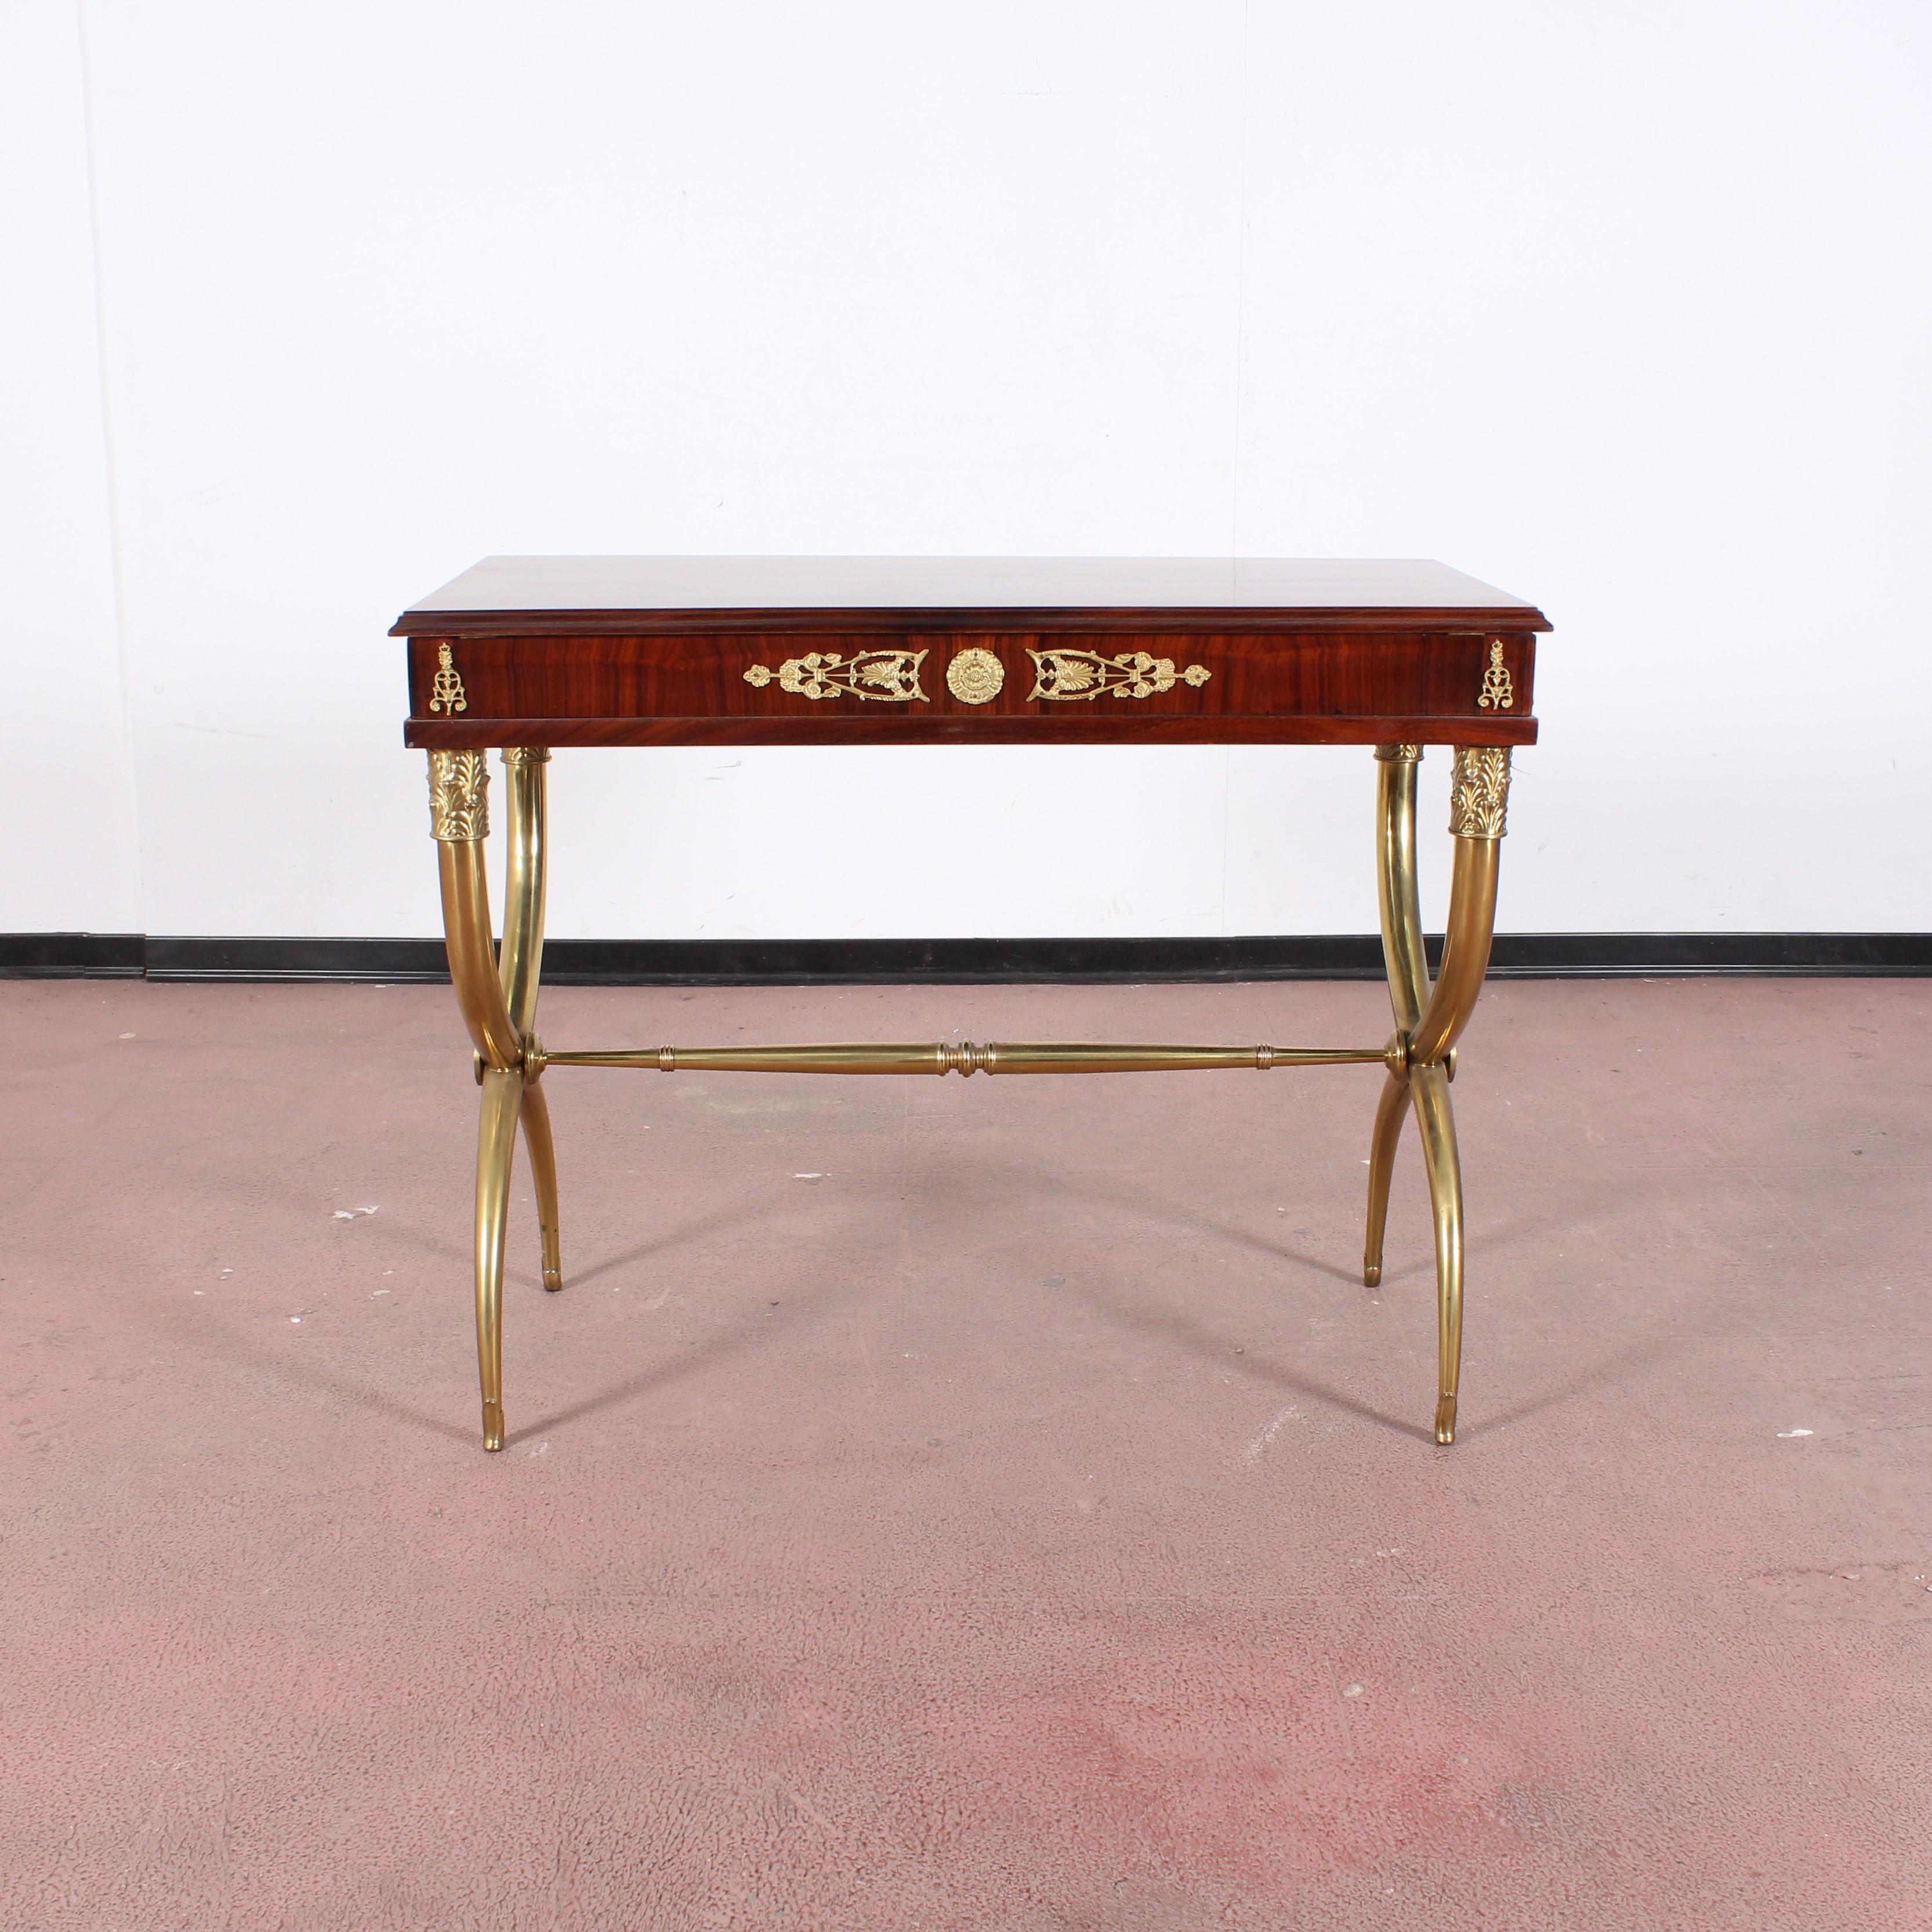 Console in the style of Gio Ponti made with front friezes and legs in curved tubular brass, and wooden top-container, with top opening flap door, with key lock.. produced in Cantù, circa 1950s.
Wear consistent with age and use.